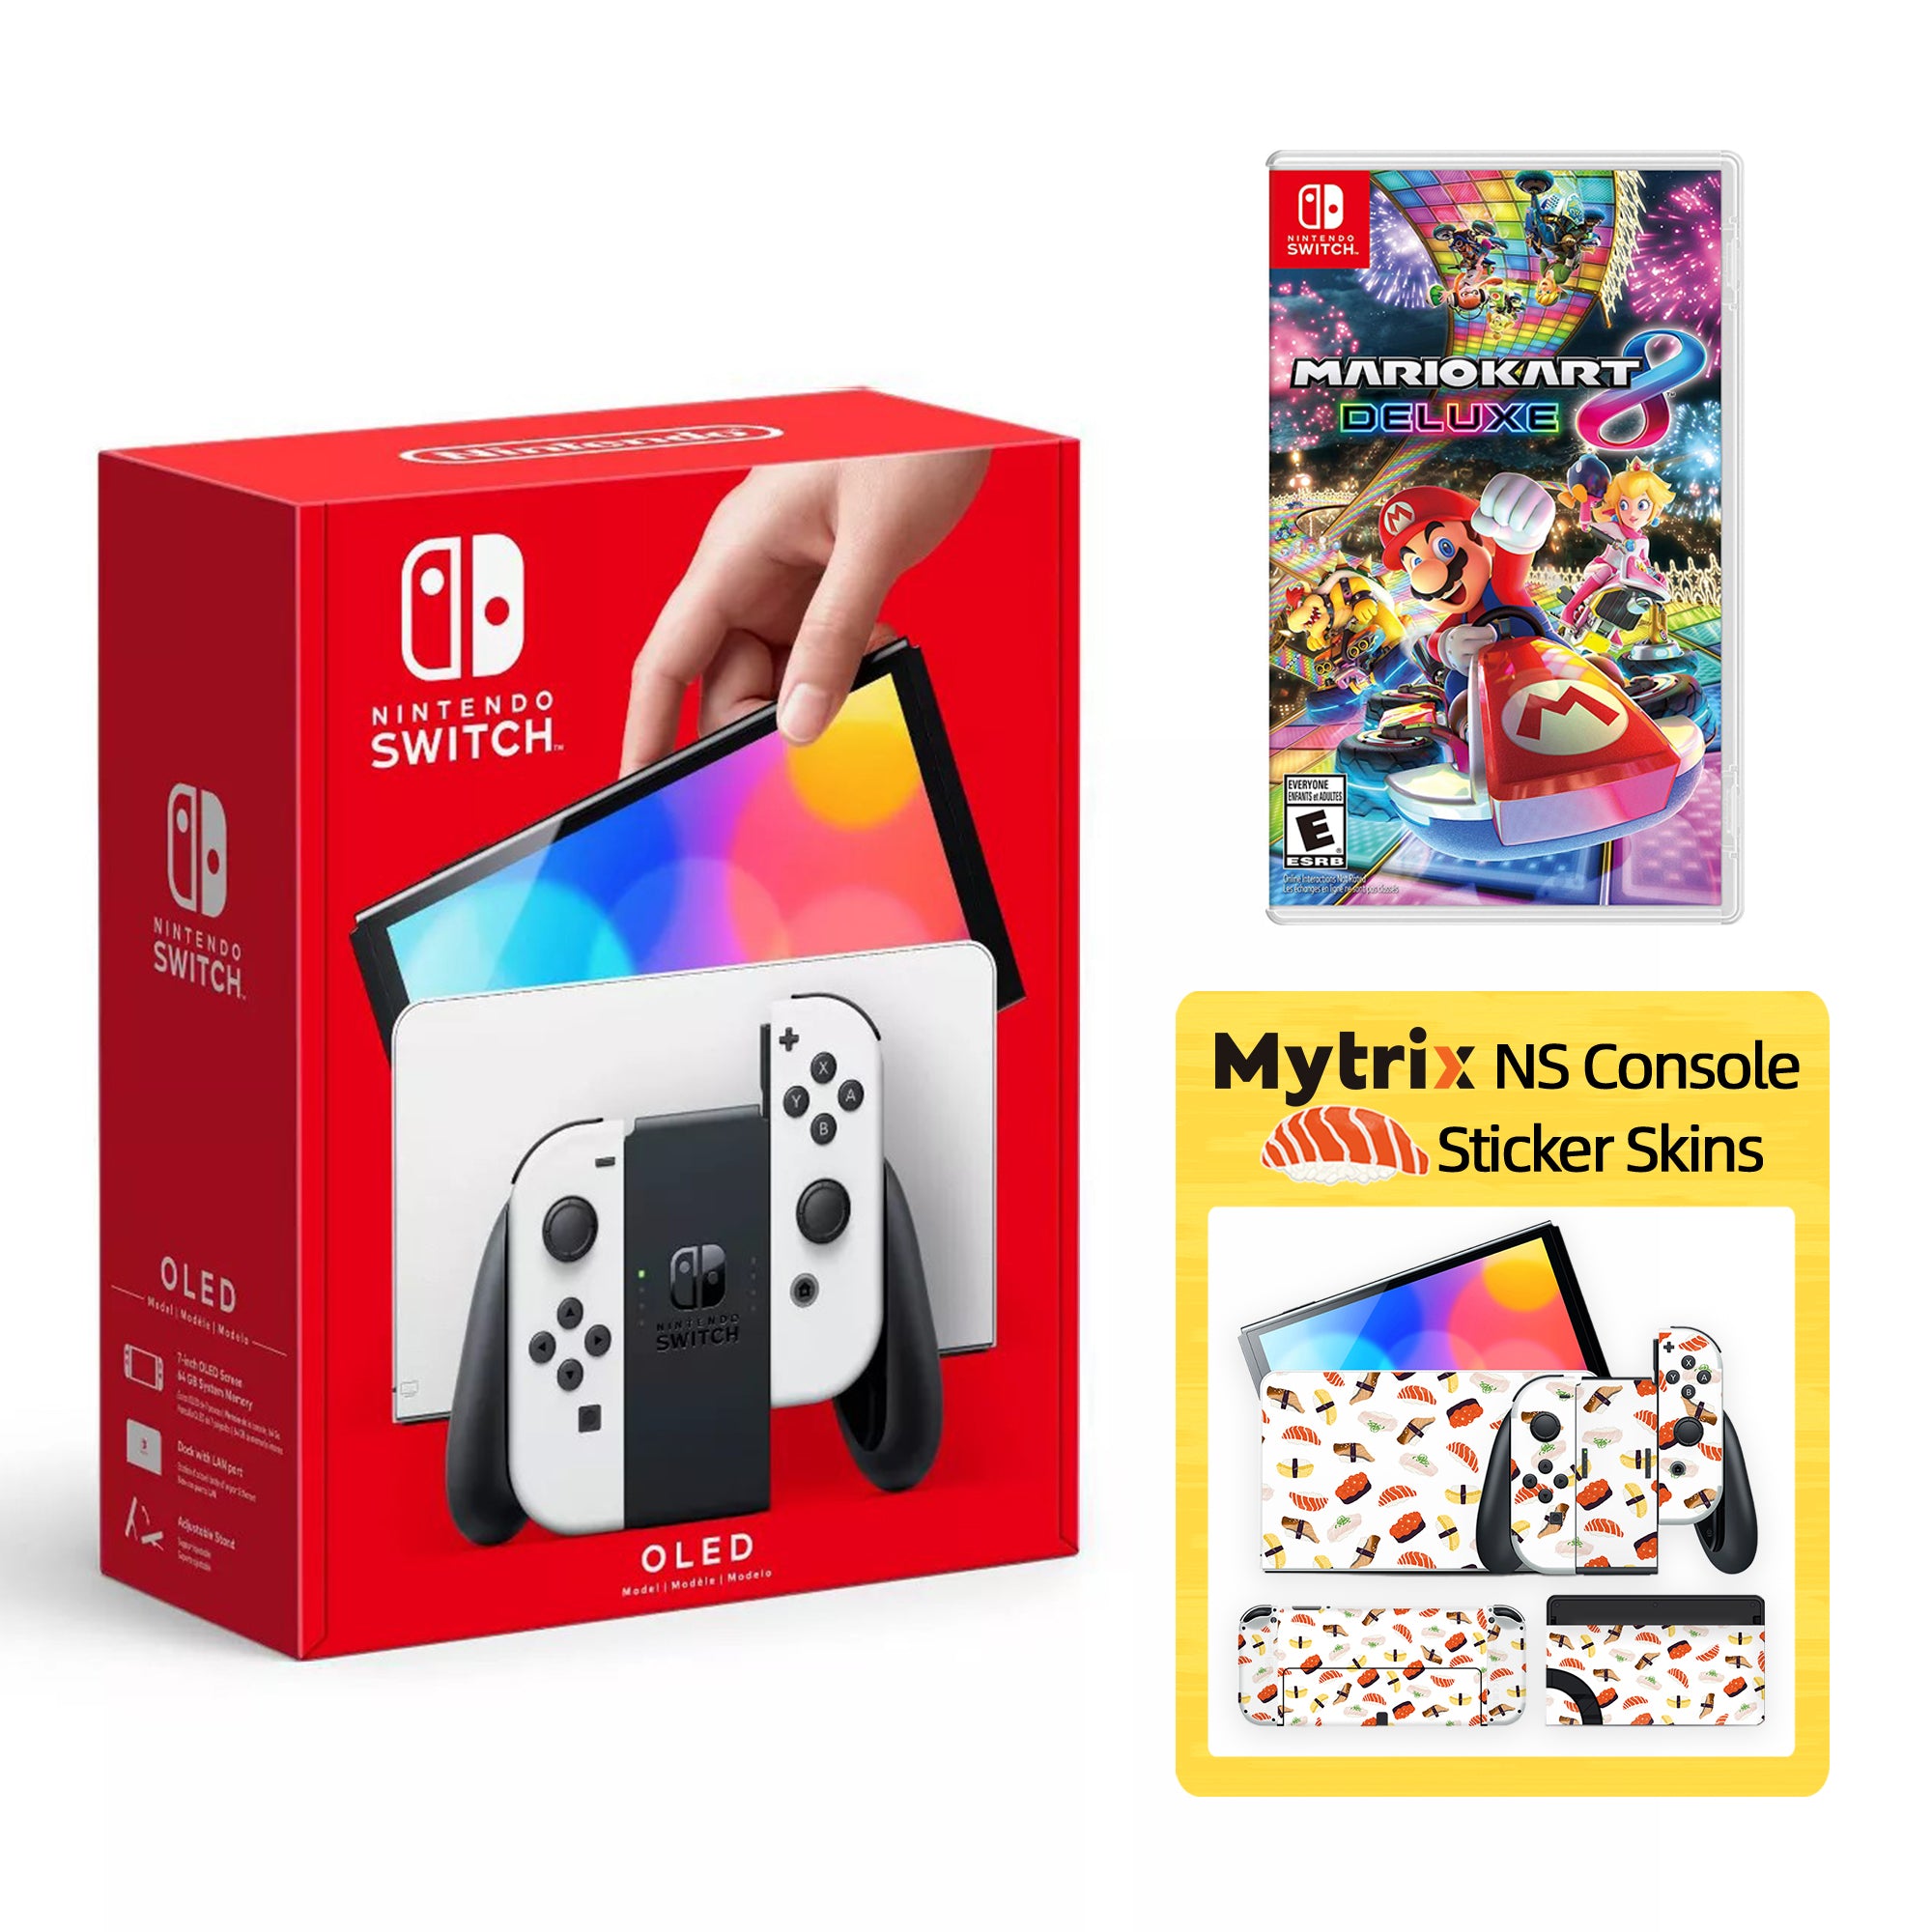 2022 New Nintendo Switch OLED Model Neon Red Blue with Mario Kart 8 Deluxe and Mytrix Full Body Skin Sticker for NS OLED Console, Dock and Joycons - Sakura Pink